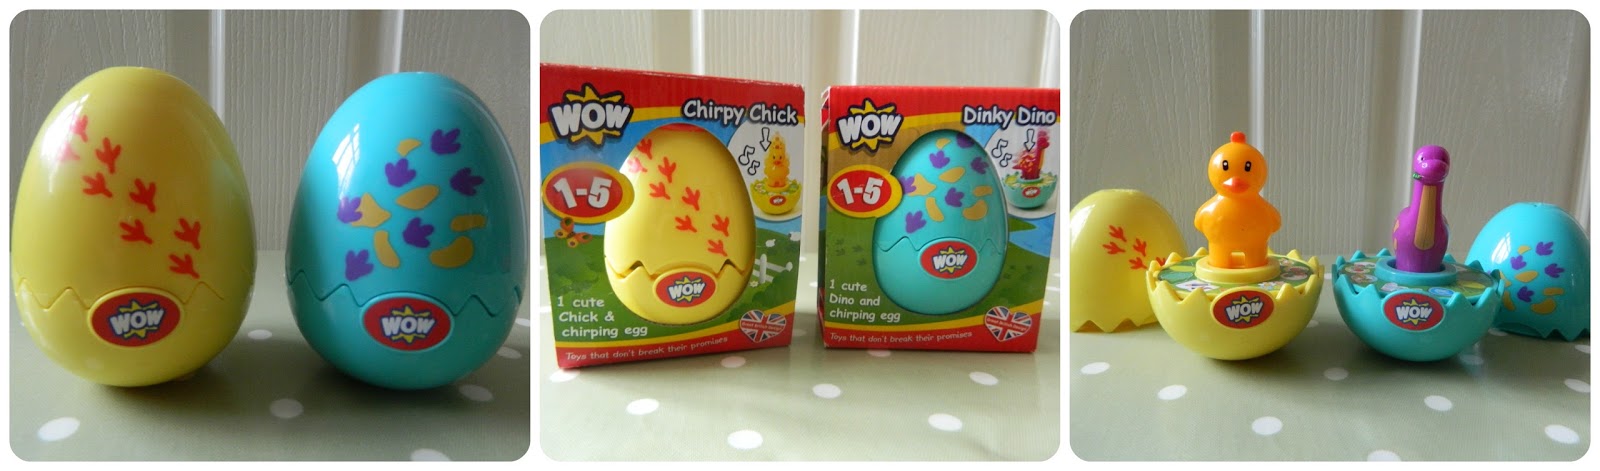 WOW Toys Easter Eggs My Dinky Dino My Tweety Chick